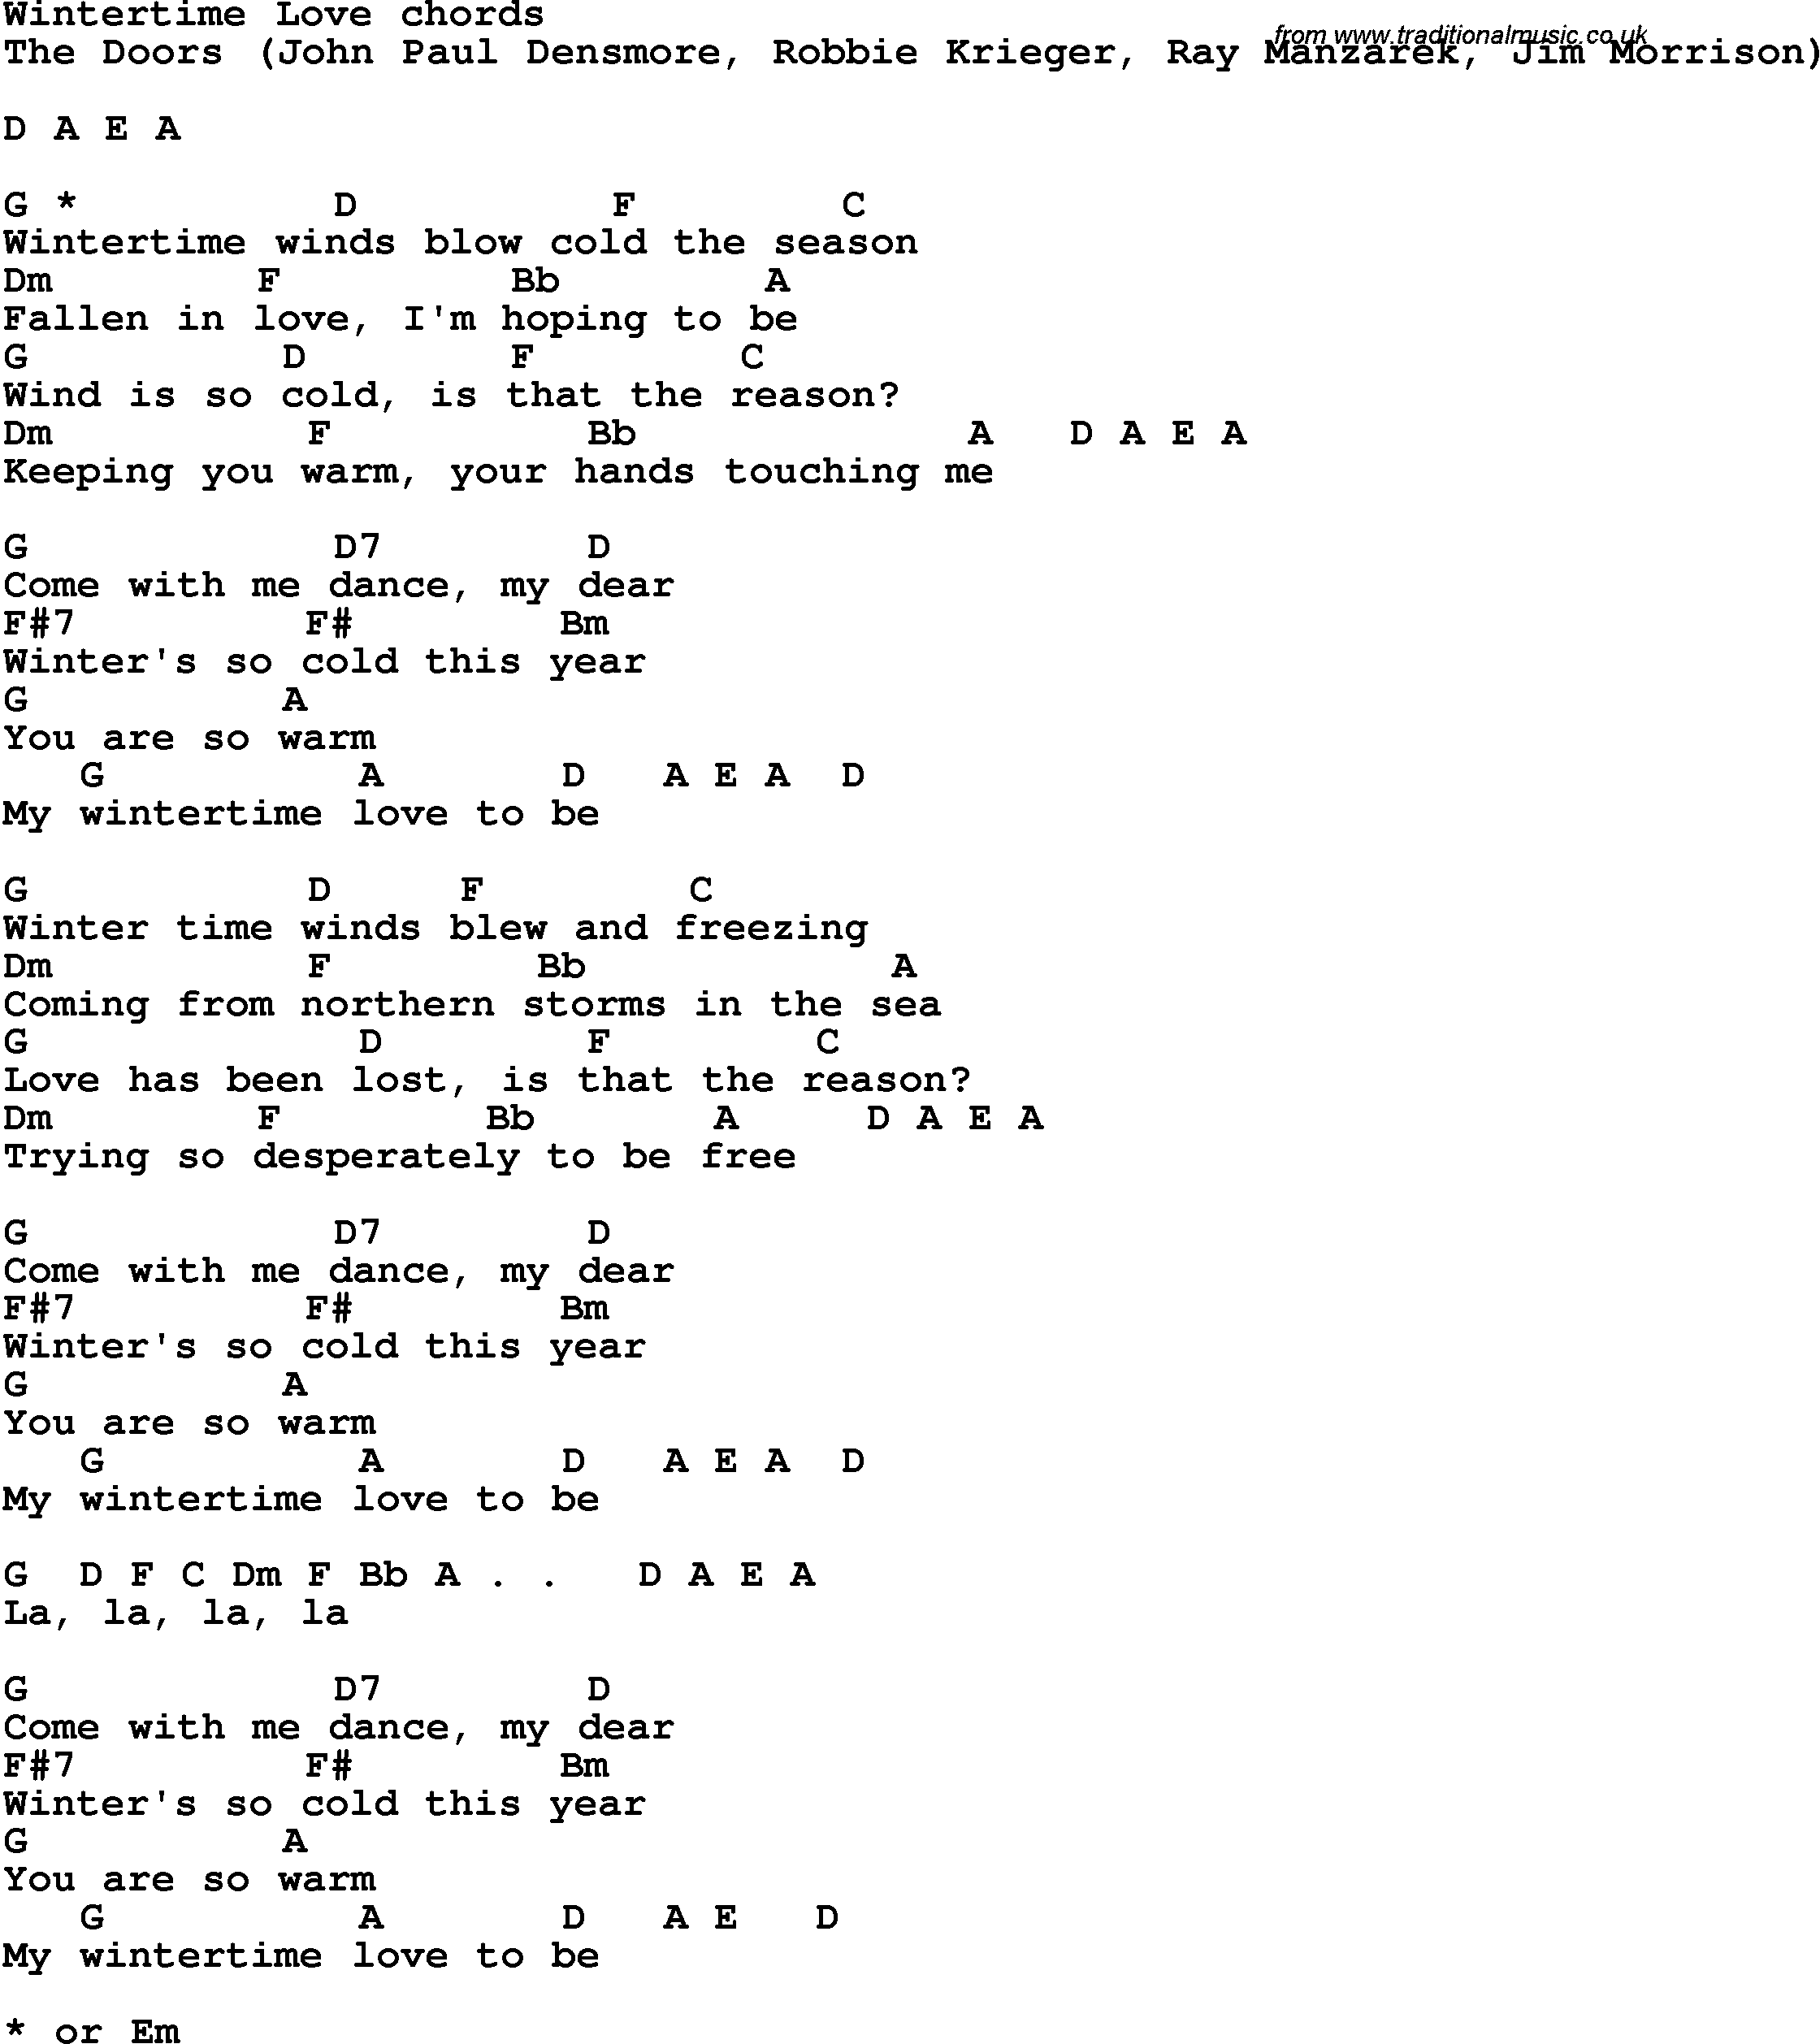 Song Lyrics with guitar chords for Wintertime Love